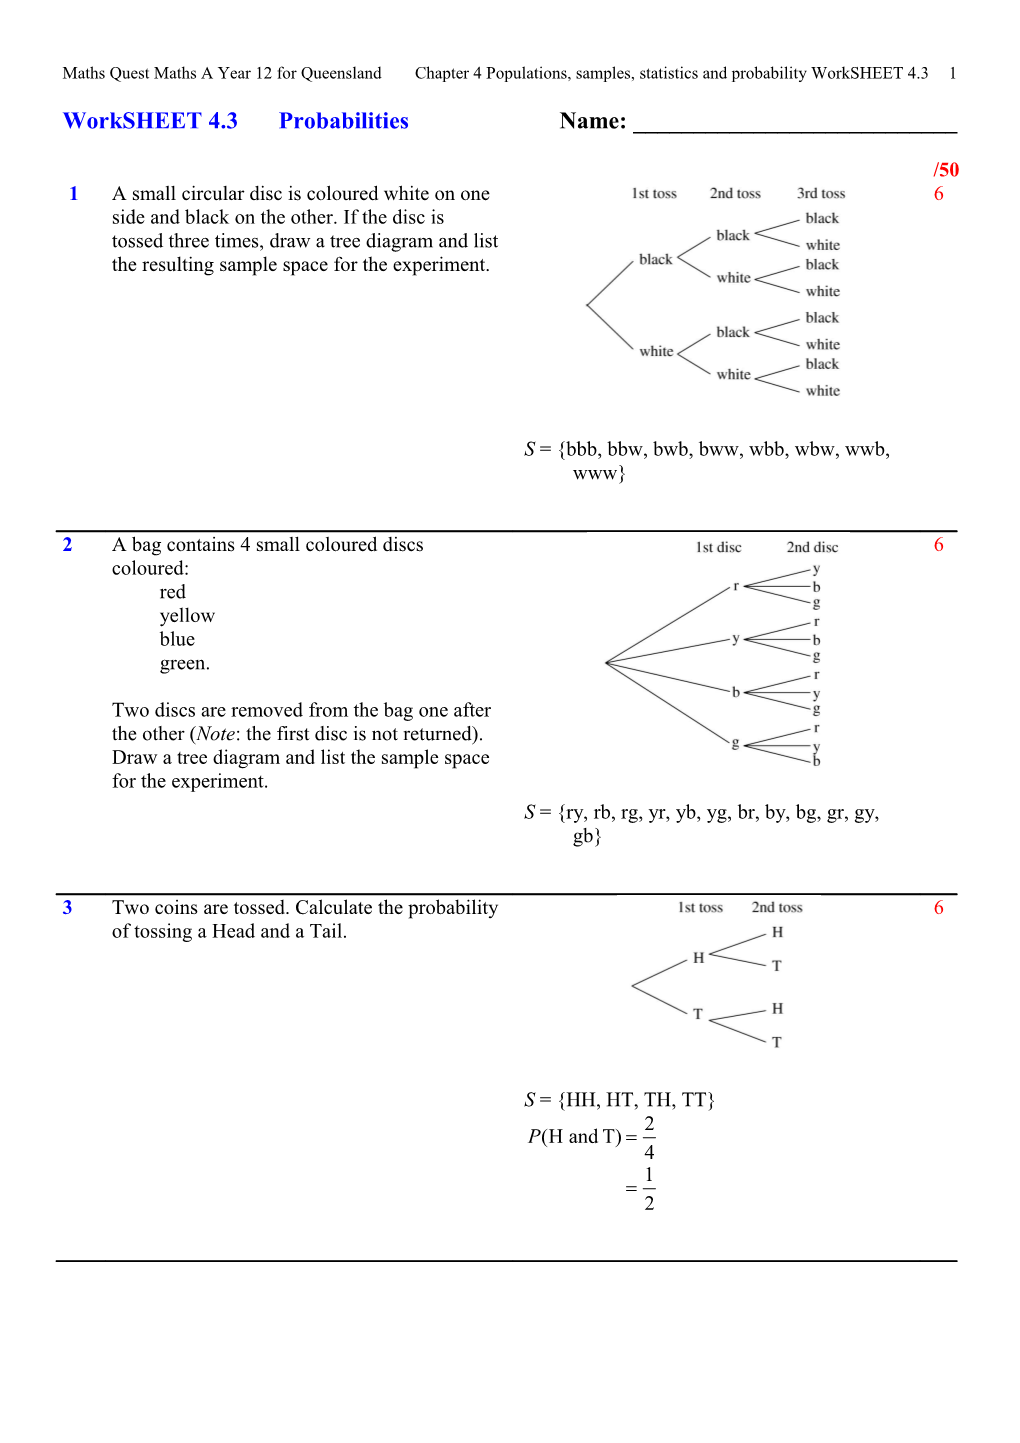 Maths Quest Maths a Year 12 for Queensland Chapter 4 Populations, Samples, Statistics And